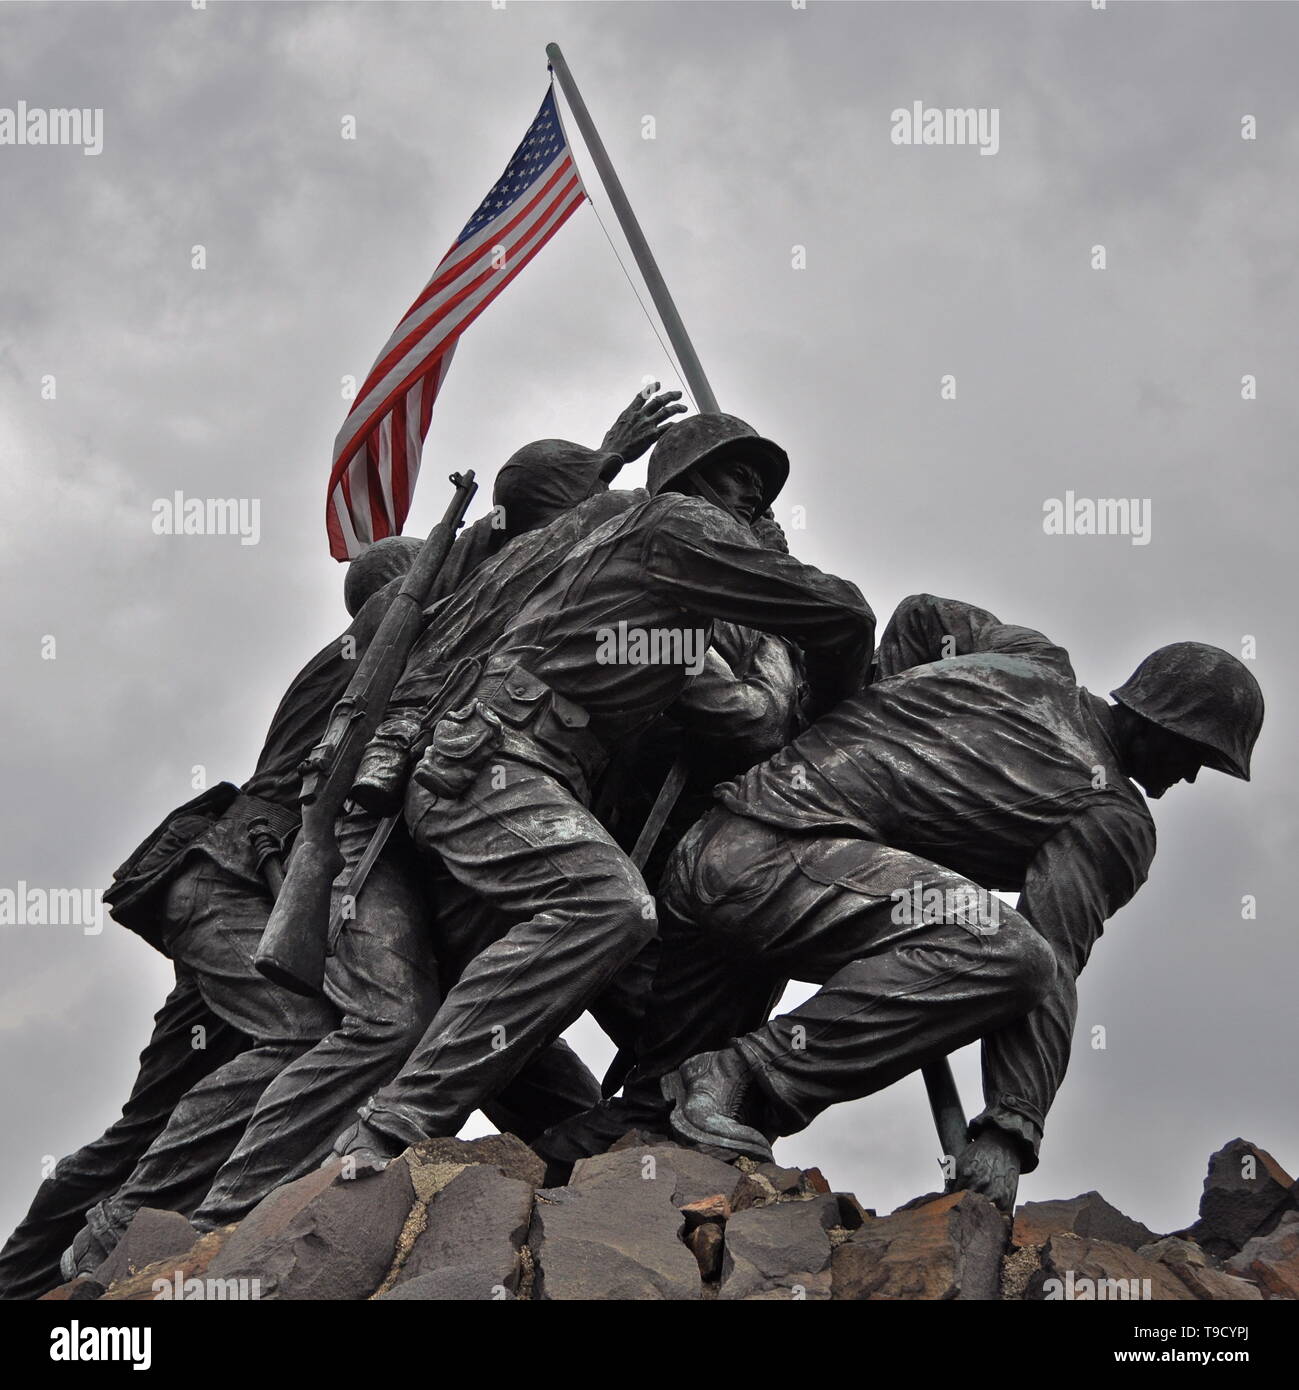 The U.S. Marine Corps War Memorial, which depicts the raising of the American flag during the Battle of Iwo Jima in WWII. Stock Photo